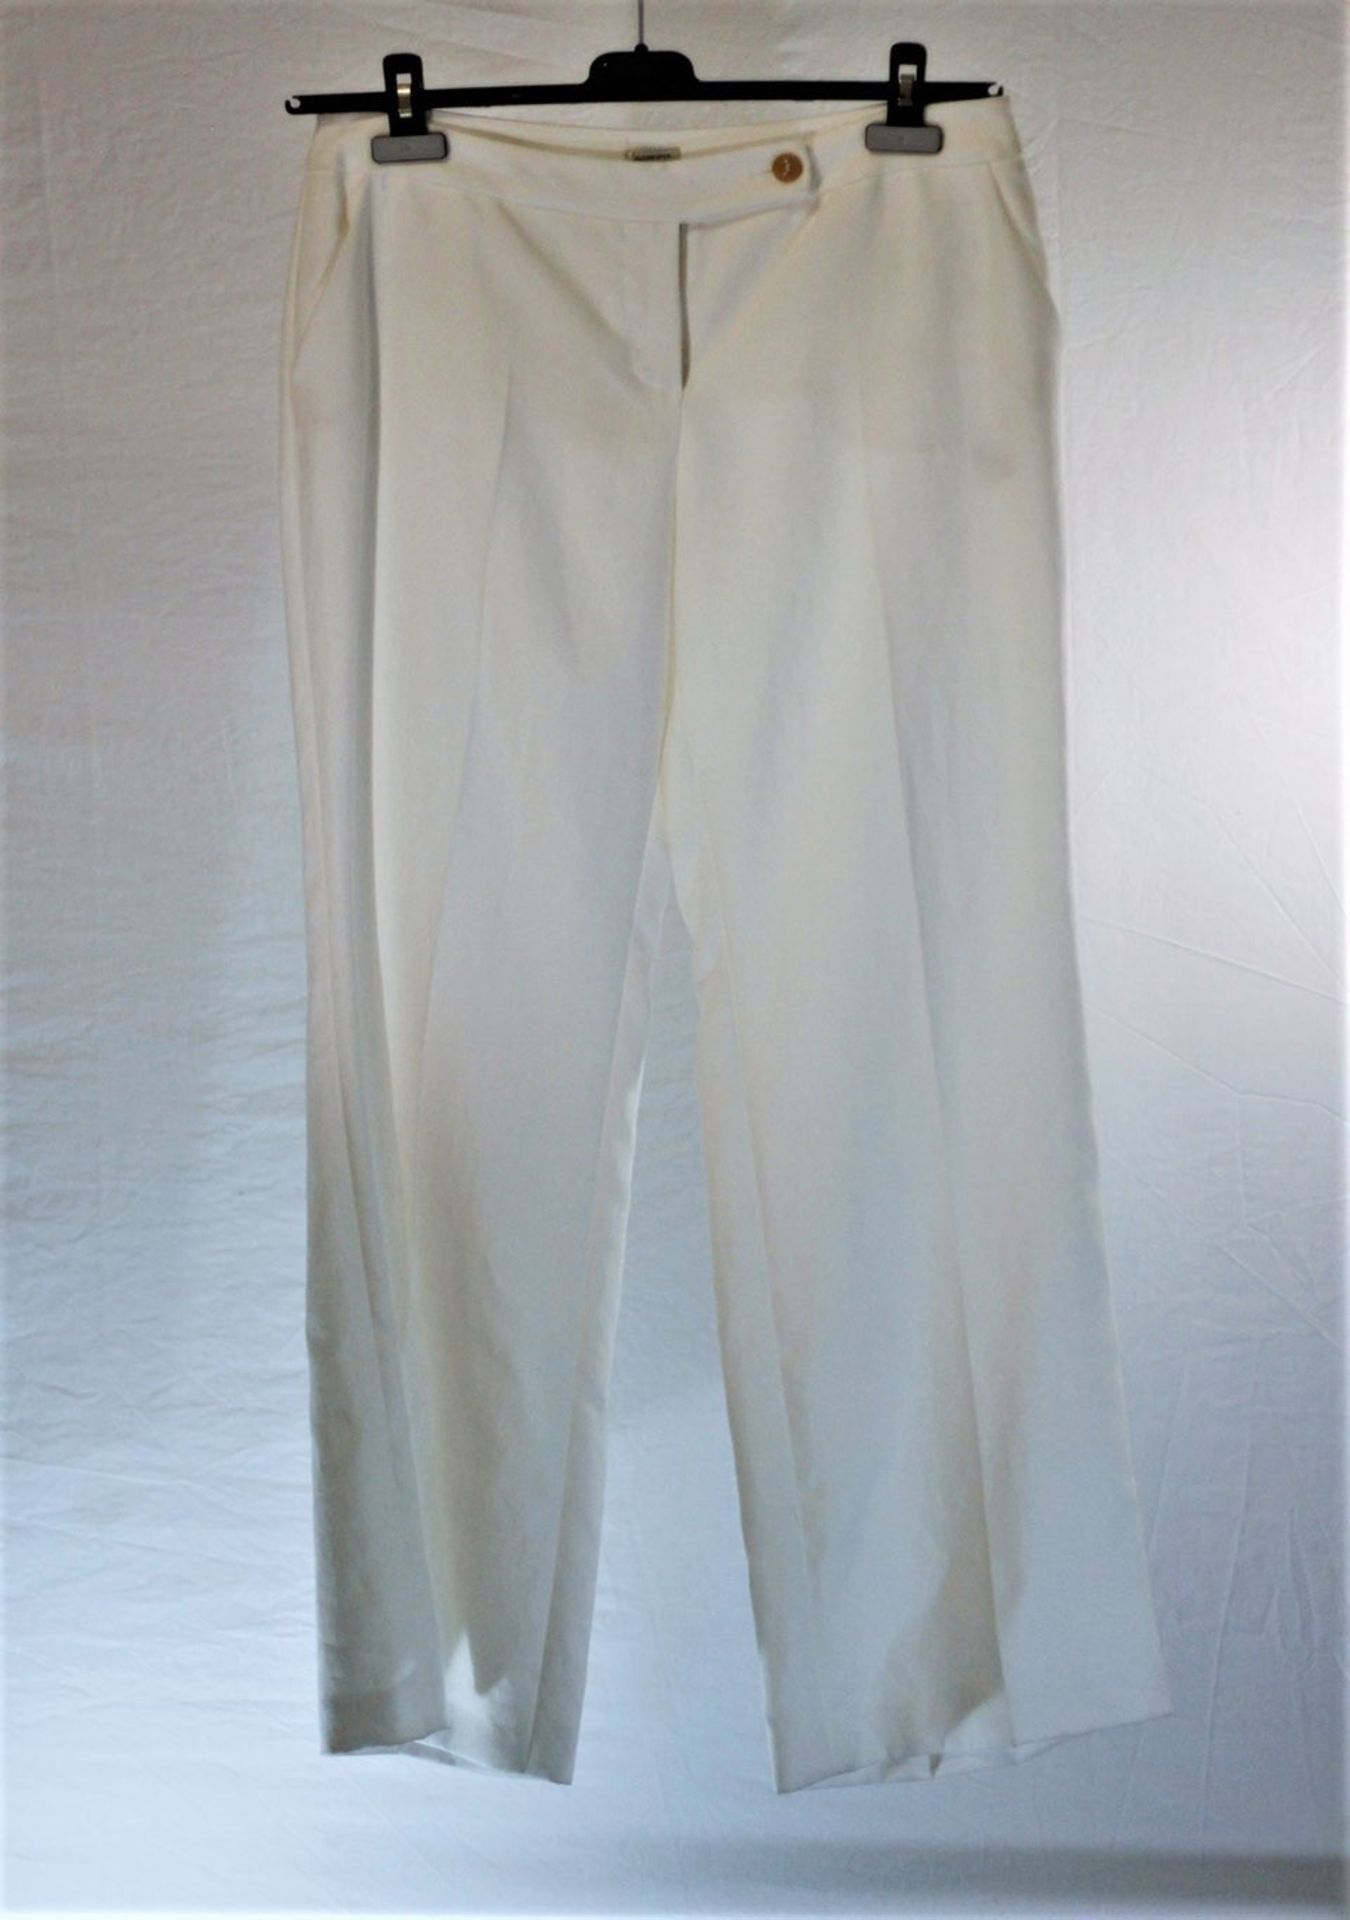 1 x Agnona White Trousers - Size: 16 - Material: 100% Ramie. Lining 52% Viscose, 48% Cotton - From a - Image 3 of 7